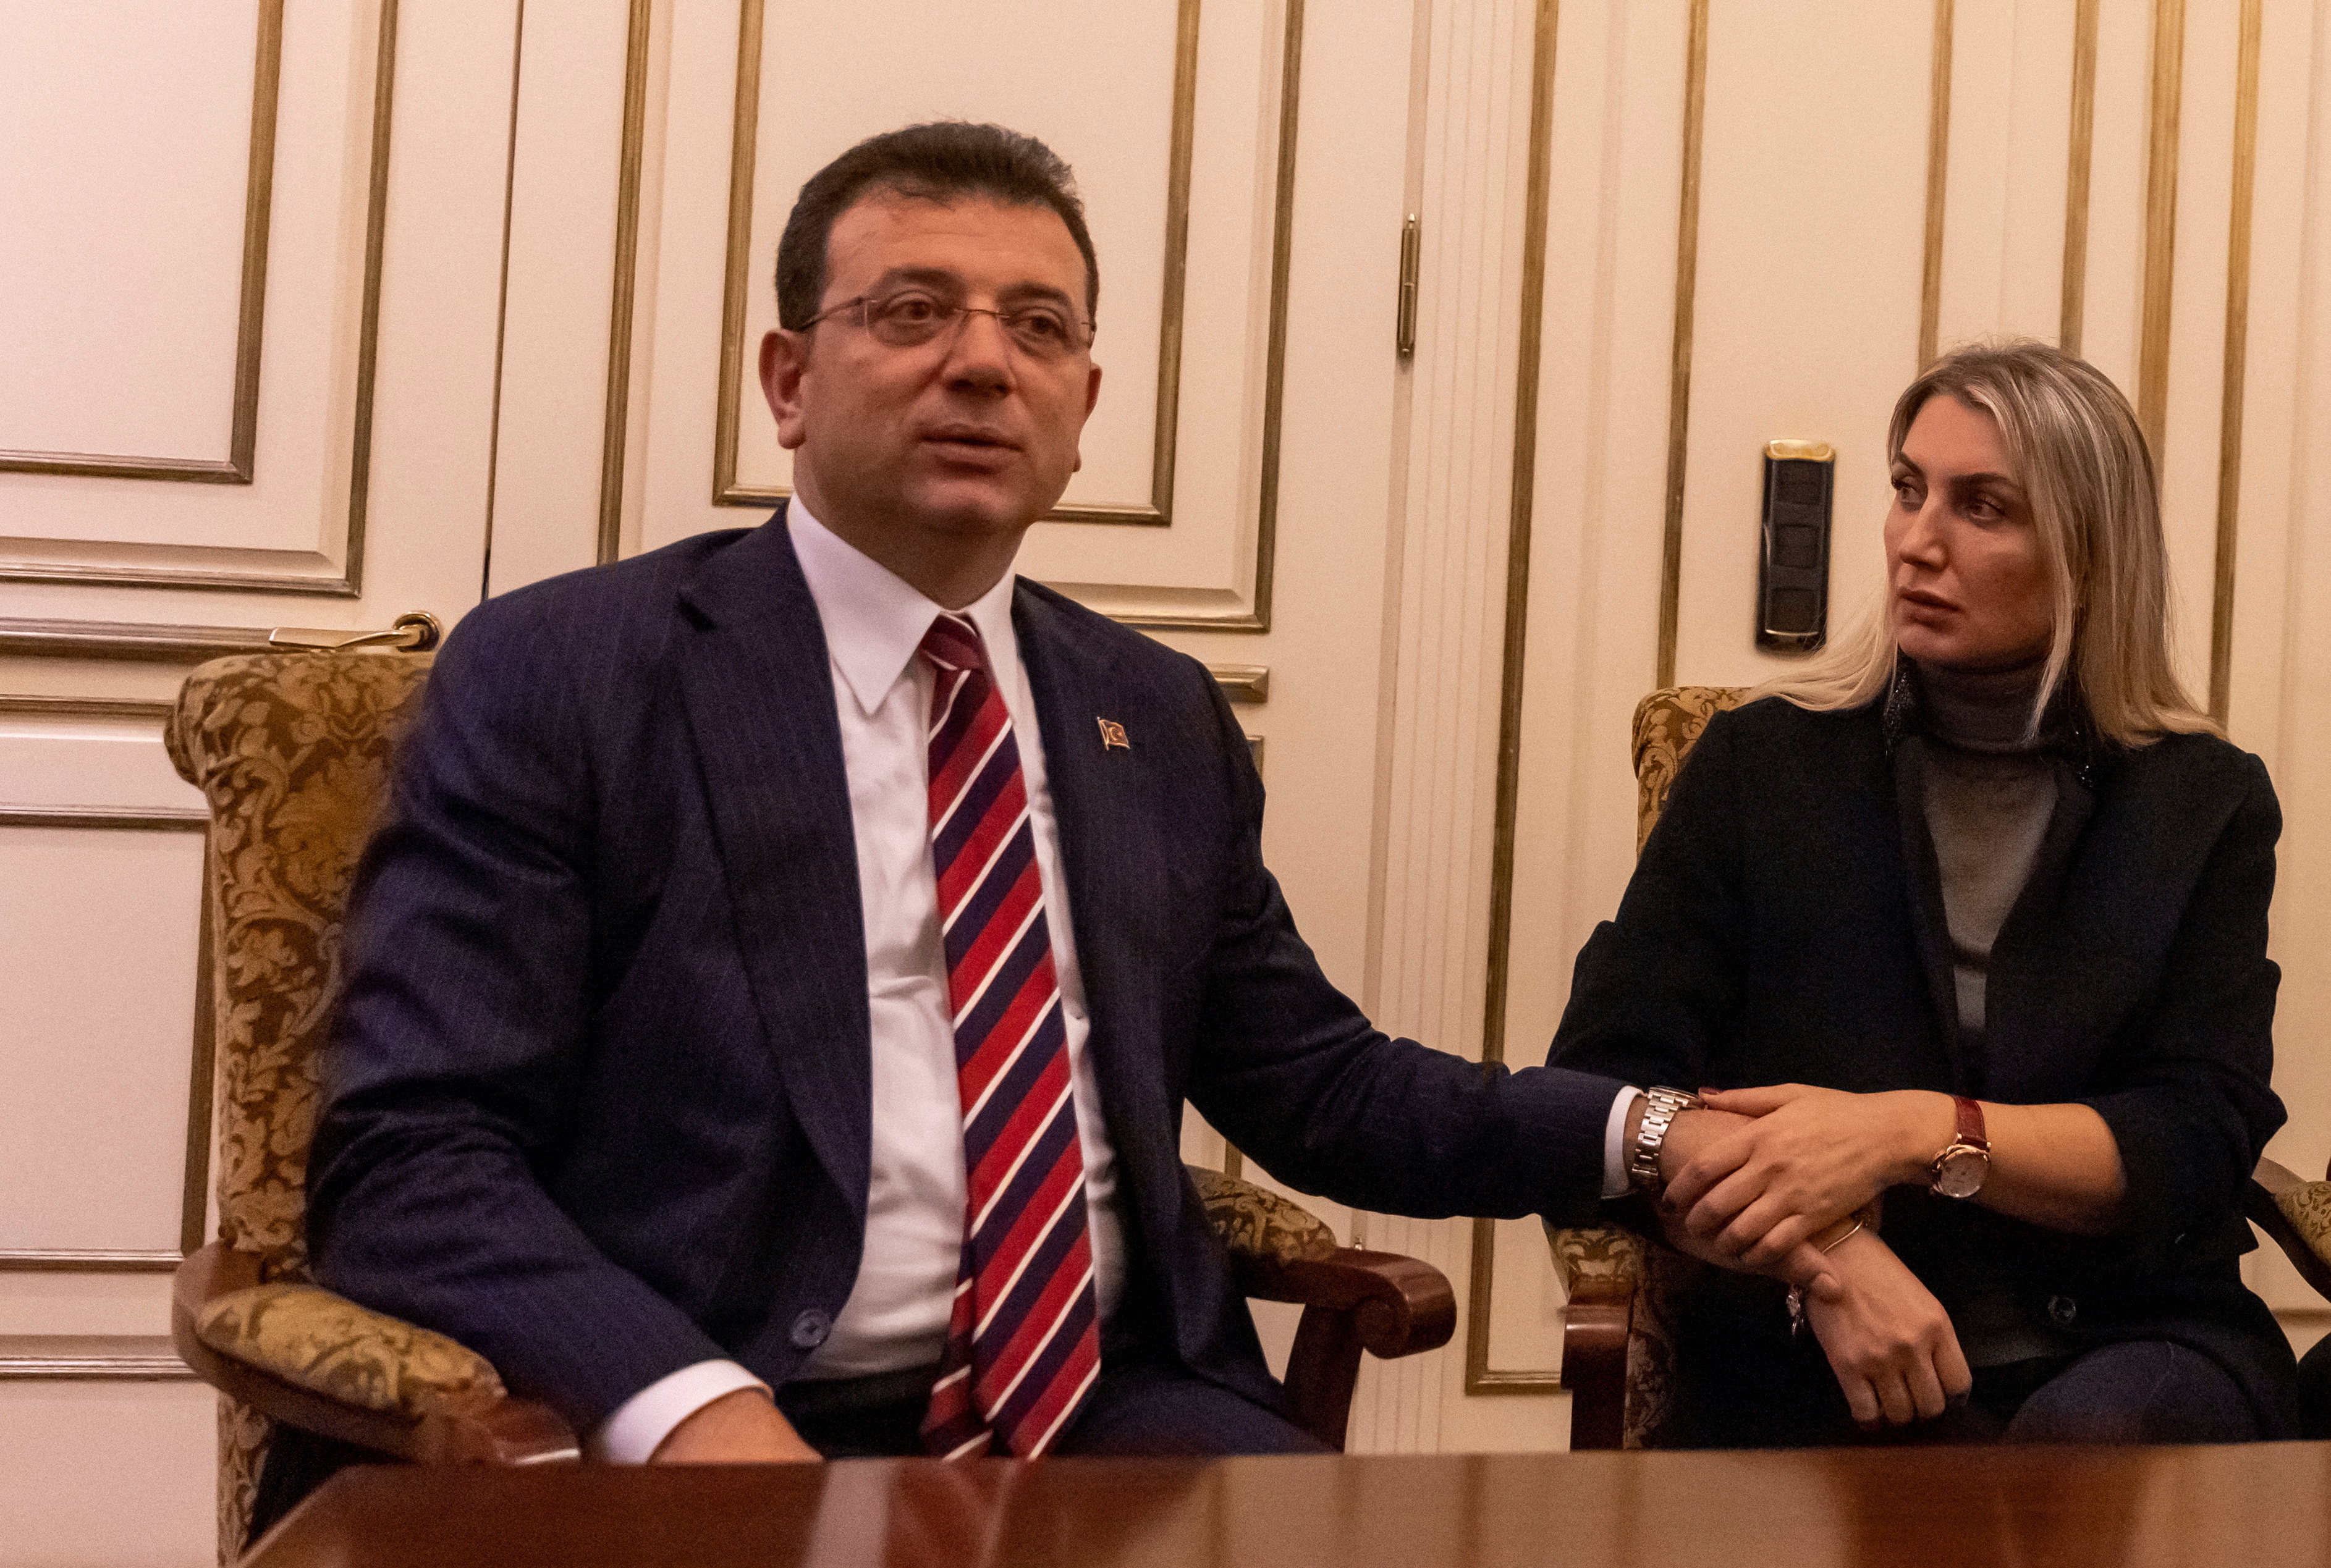 Istanbul Mayor Ekrem İmamoğlu and his wife Dilek are sitting in their office in Istanbul